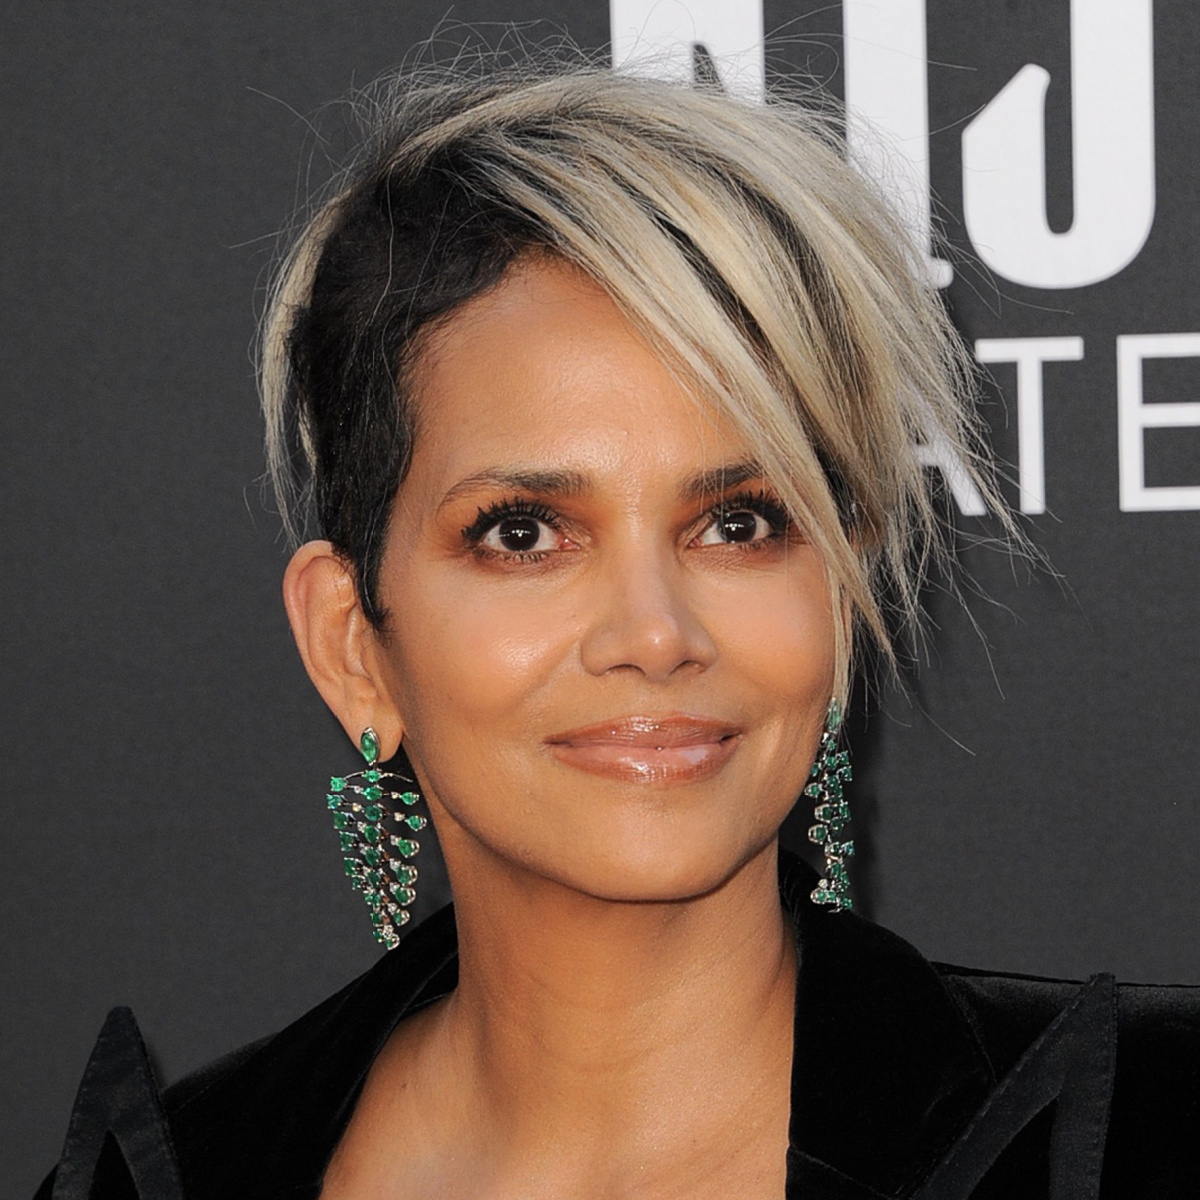 8 Chic Short Haircuts For Women Over 50 With Fine Hair, According To ...